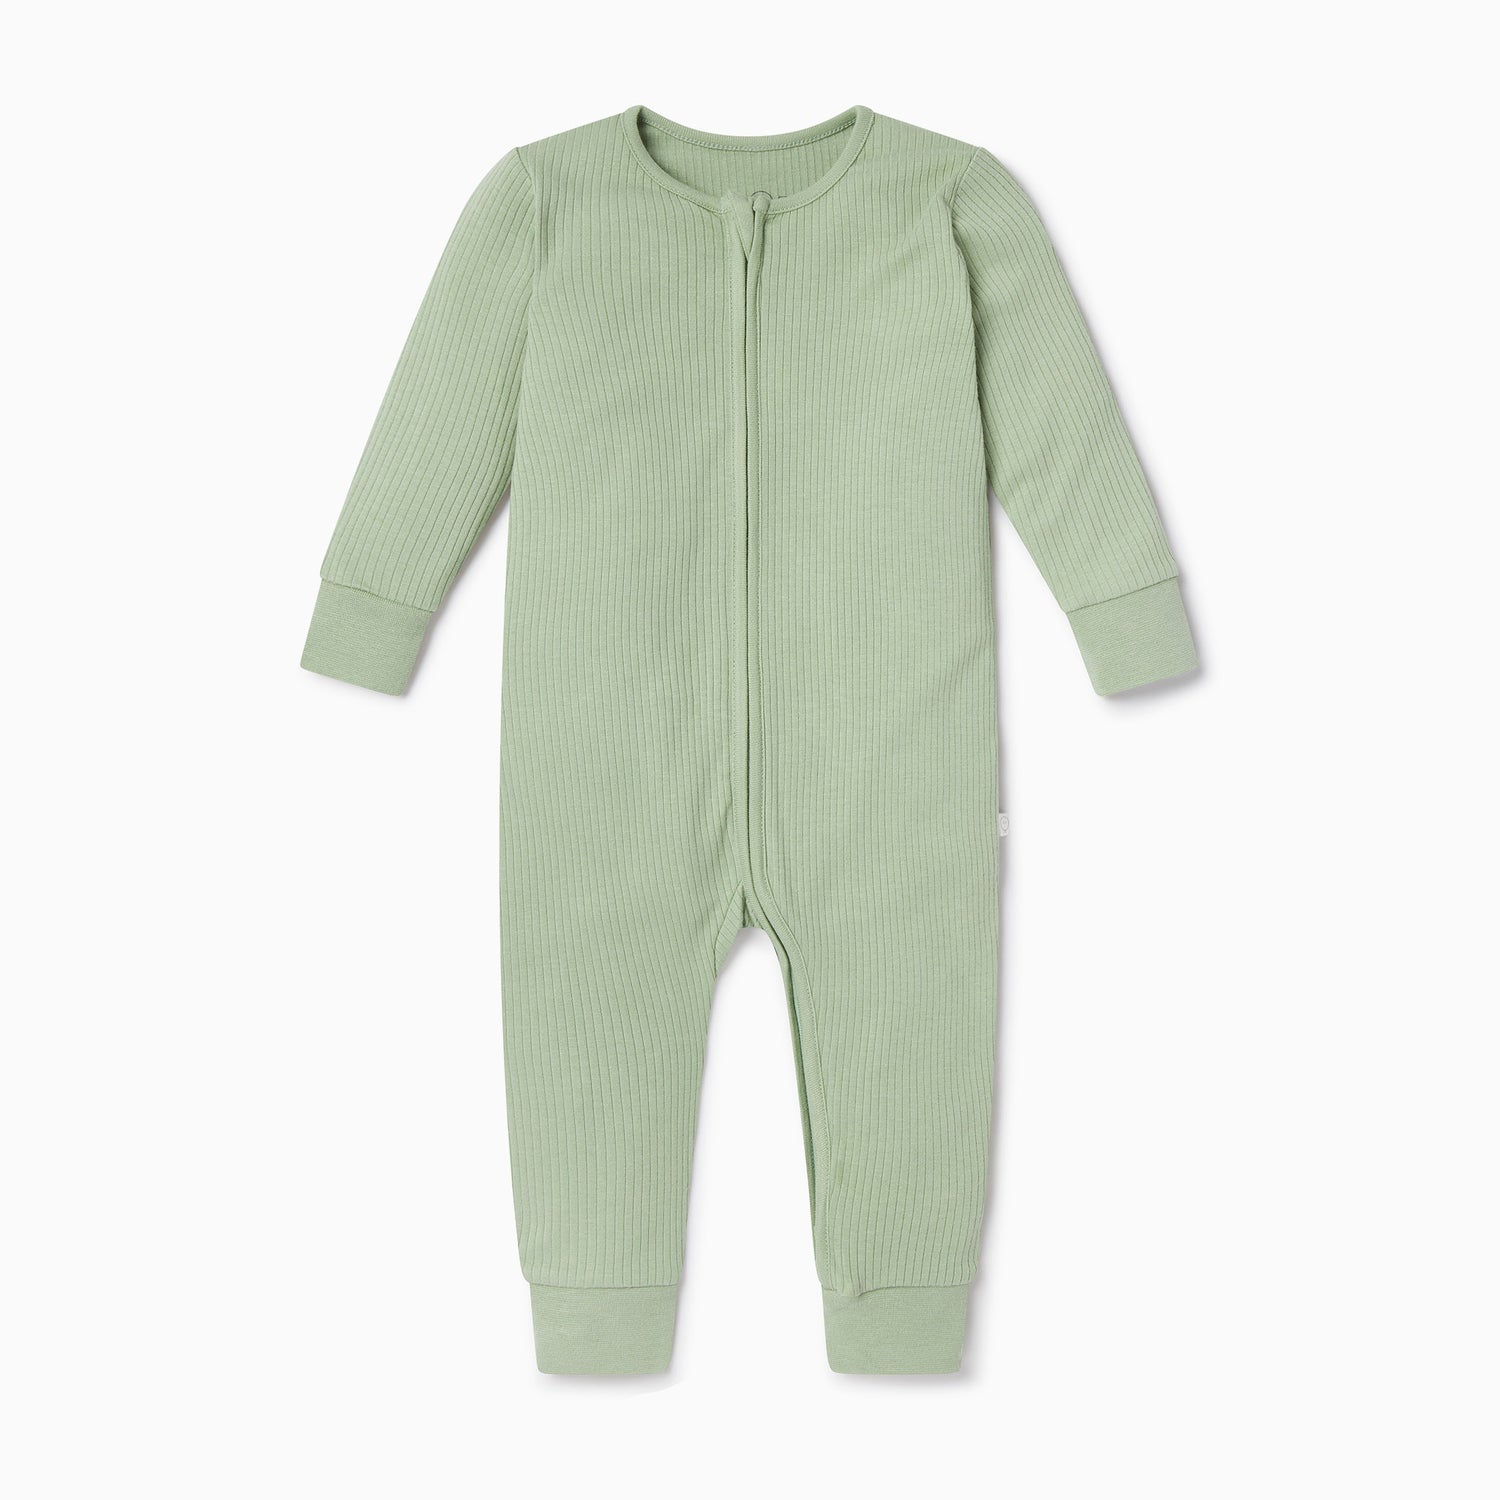 Sage ribbed zip up sleepsuit with no feet